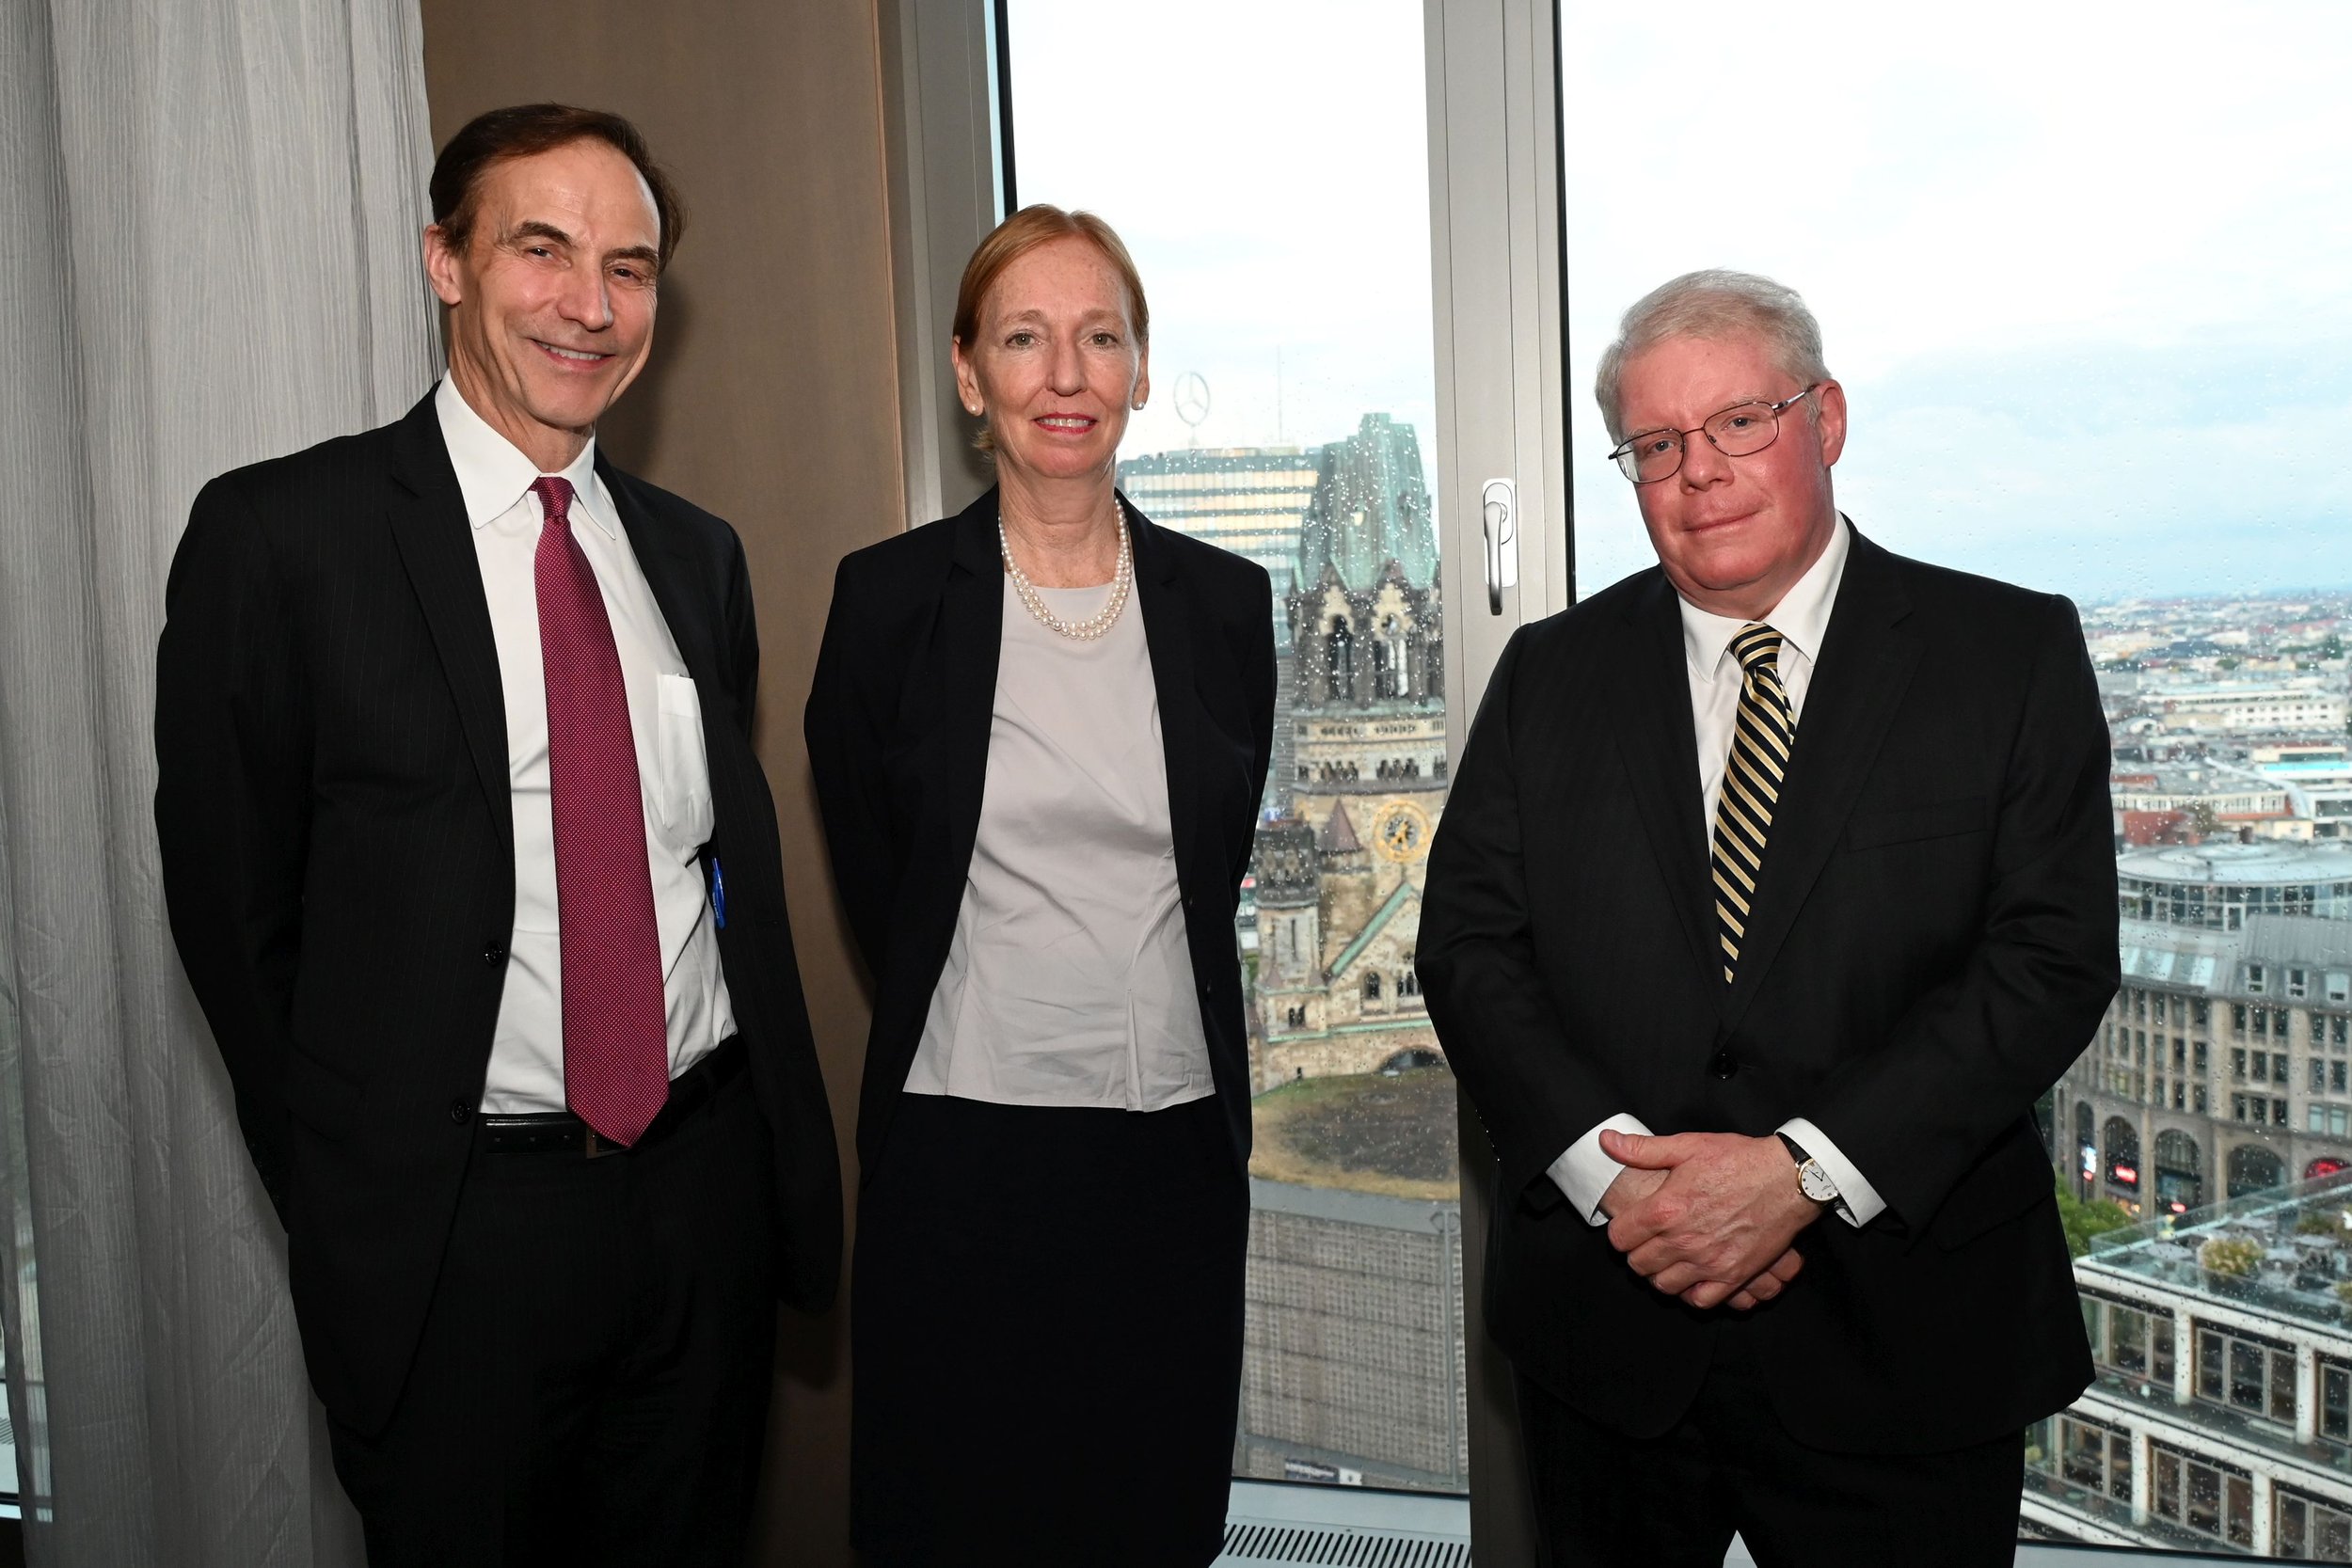  From left: Amb. Paul Jones (RTX), HE Ambassador Emily Haber (German Embassy to the US), DCM Clark Price (US Embassy to Germany) 